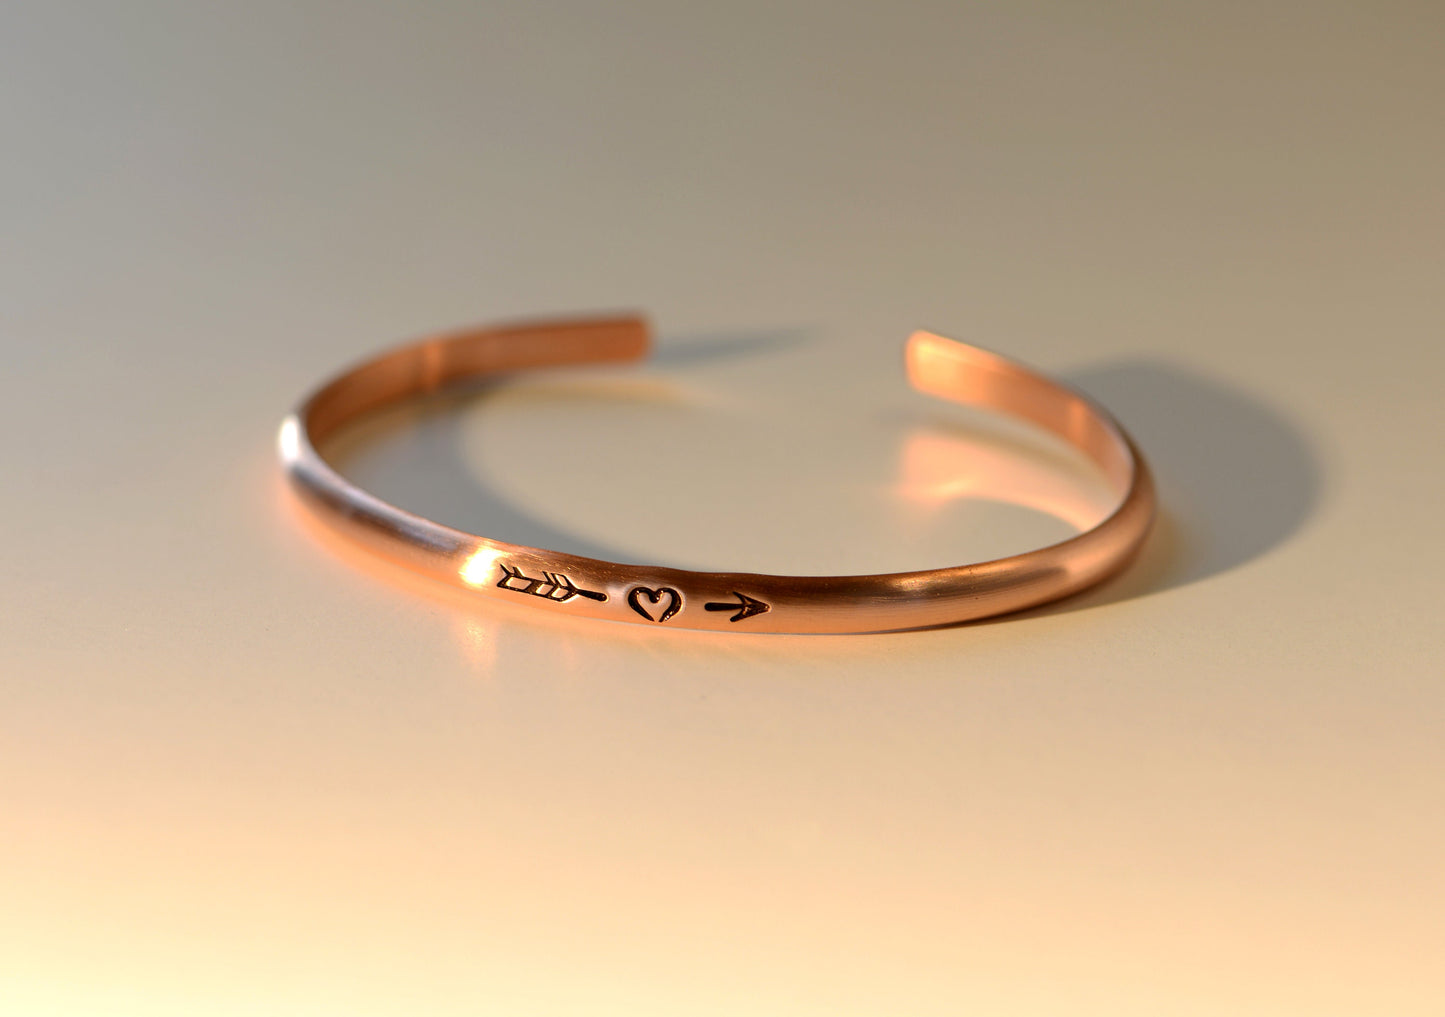 Copper bracelet with arrow and a heart in dainty styling for stacking